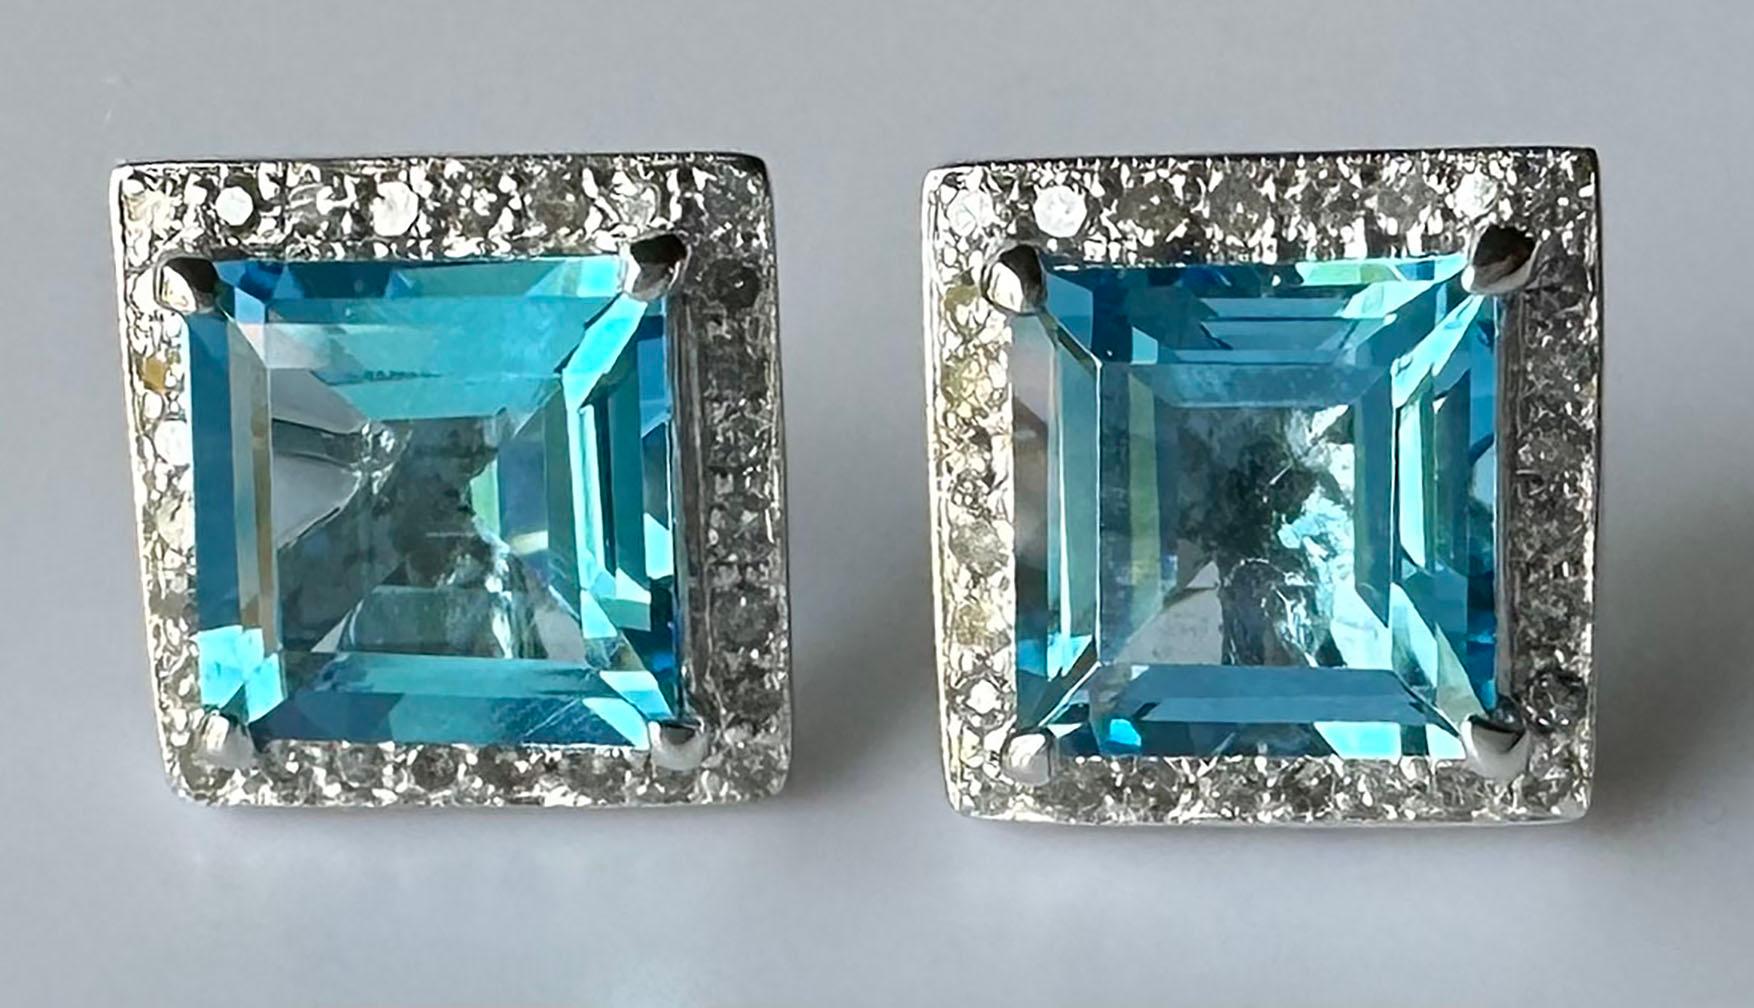 14kt White Gold Earrings set with Blue Topaz & White Sapphire Rounds. These lovely earrings are a medium blue color accented by tiny white Sapphire round accent stones. The Topaz are cut in a square step cut.

Originally from San Diego, California,